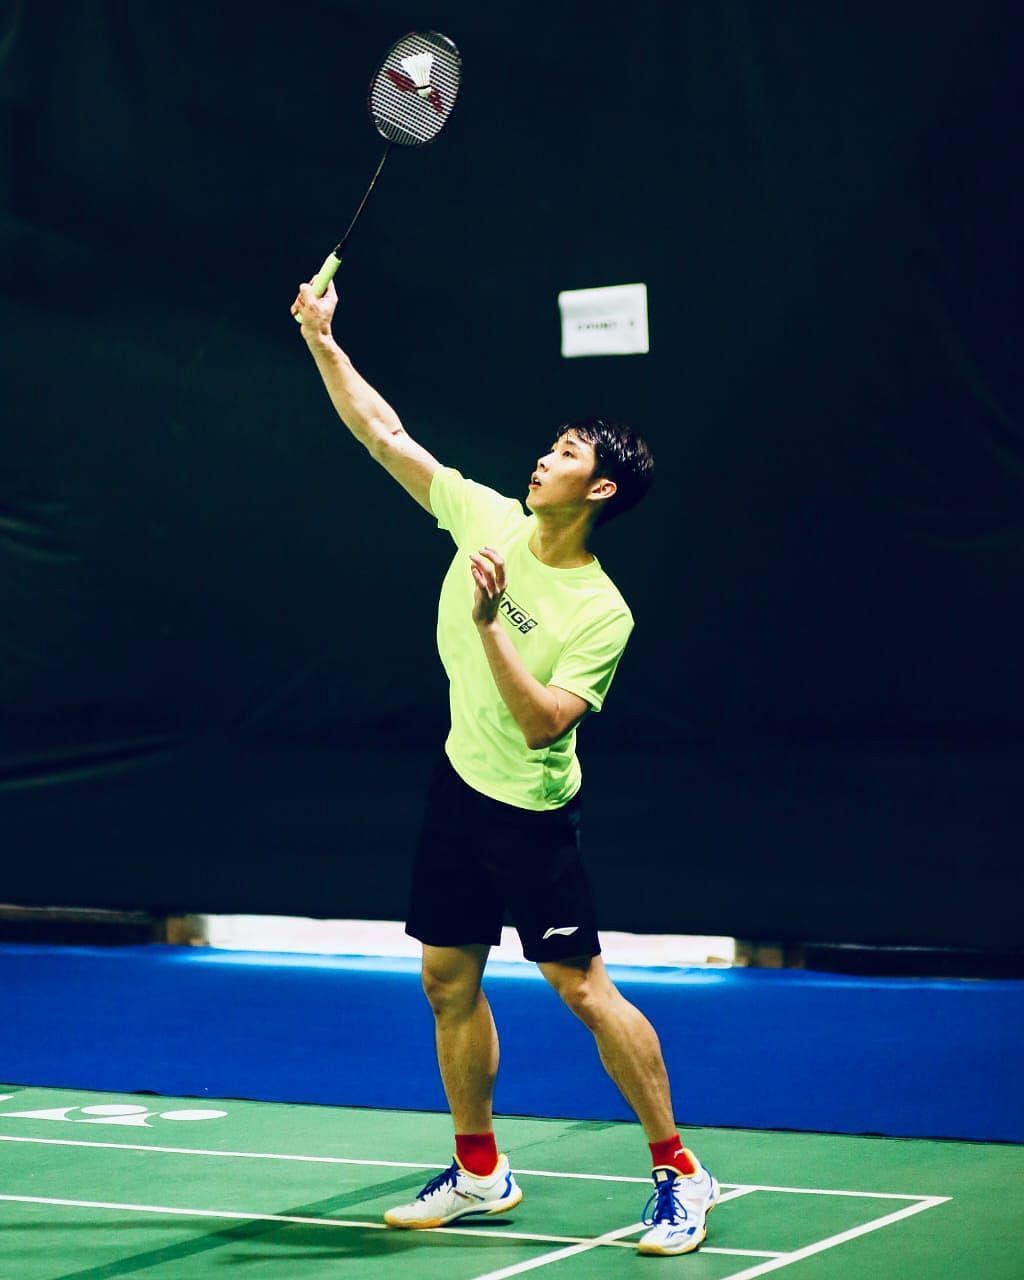 2021 World Champion Loh Kean Yew during a training session ahead of the India Open. (PC: BAI)